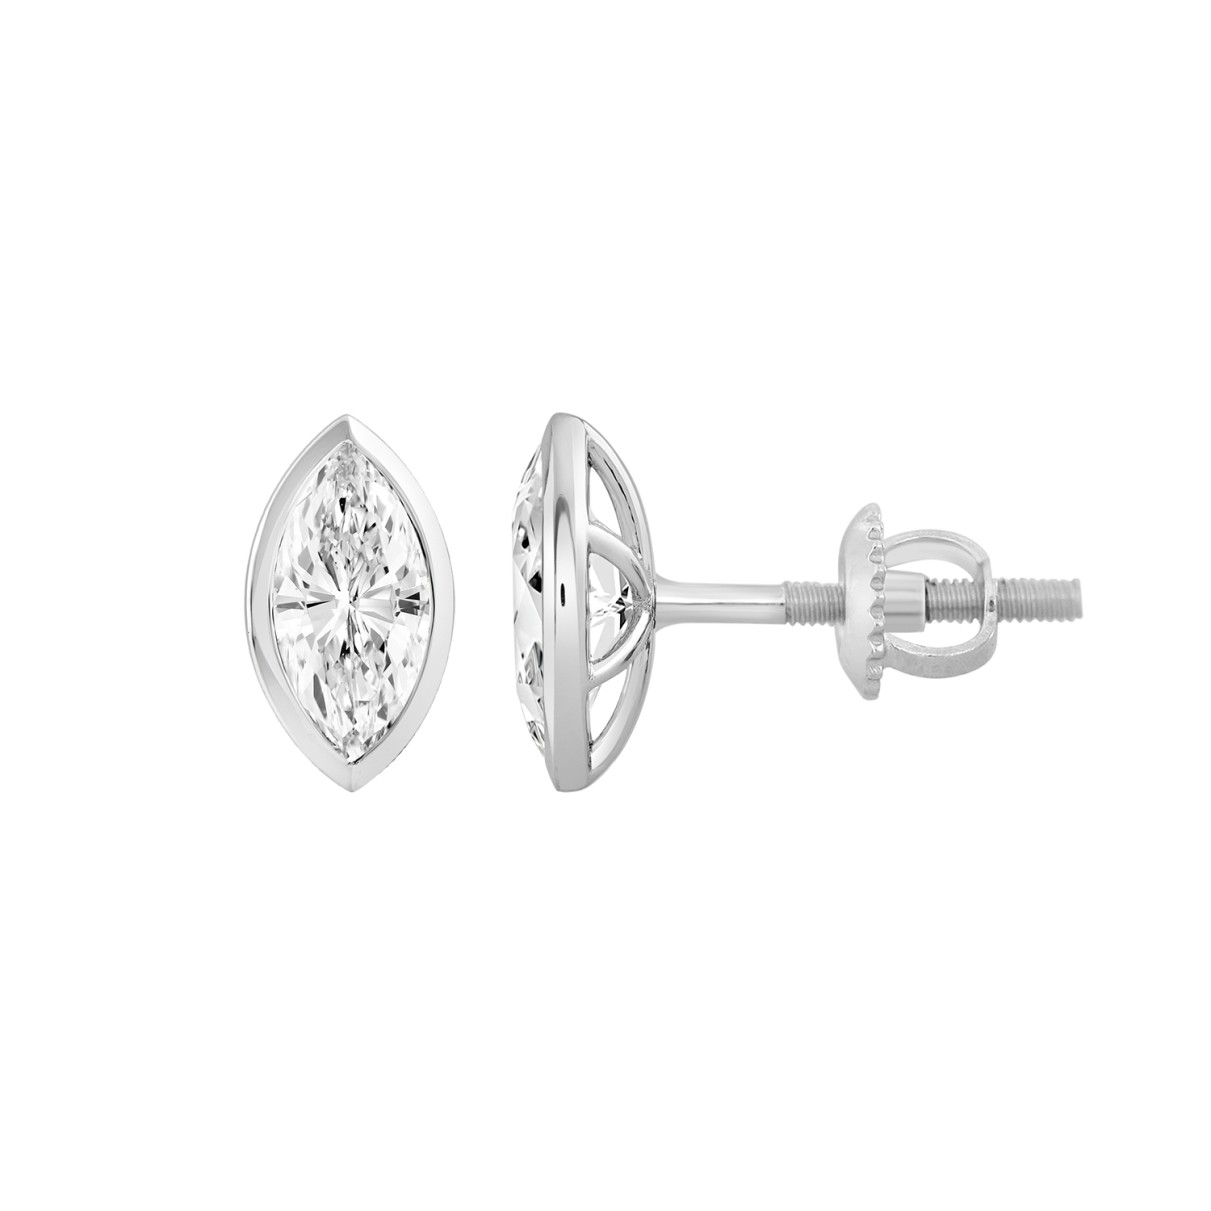 LADIES SOLITAIRE EARRINGS 1CT MARQUISE DIAMOND 14K WHITE GOLD